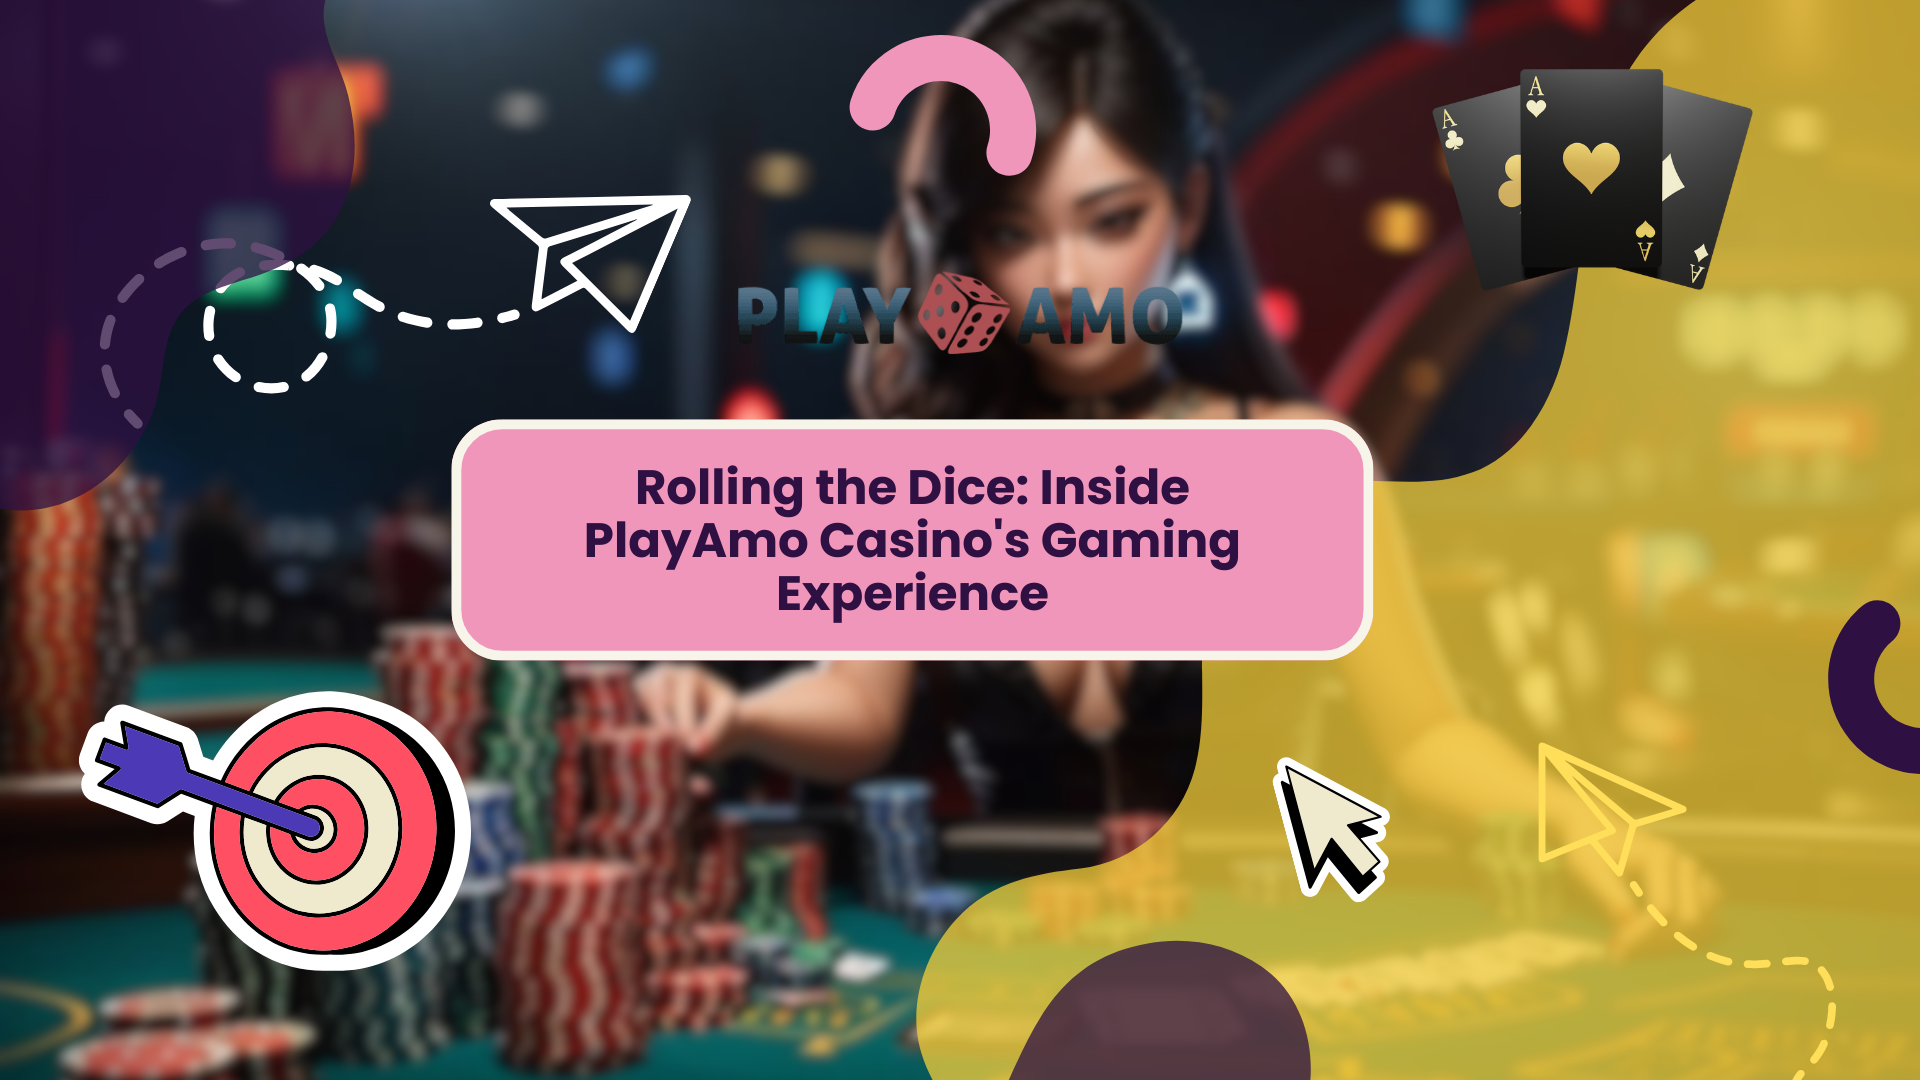 Rolling the Dice: Inside PlayAmo Casino's Gaming Experience